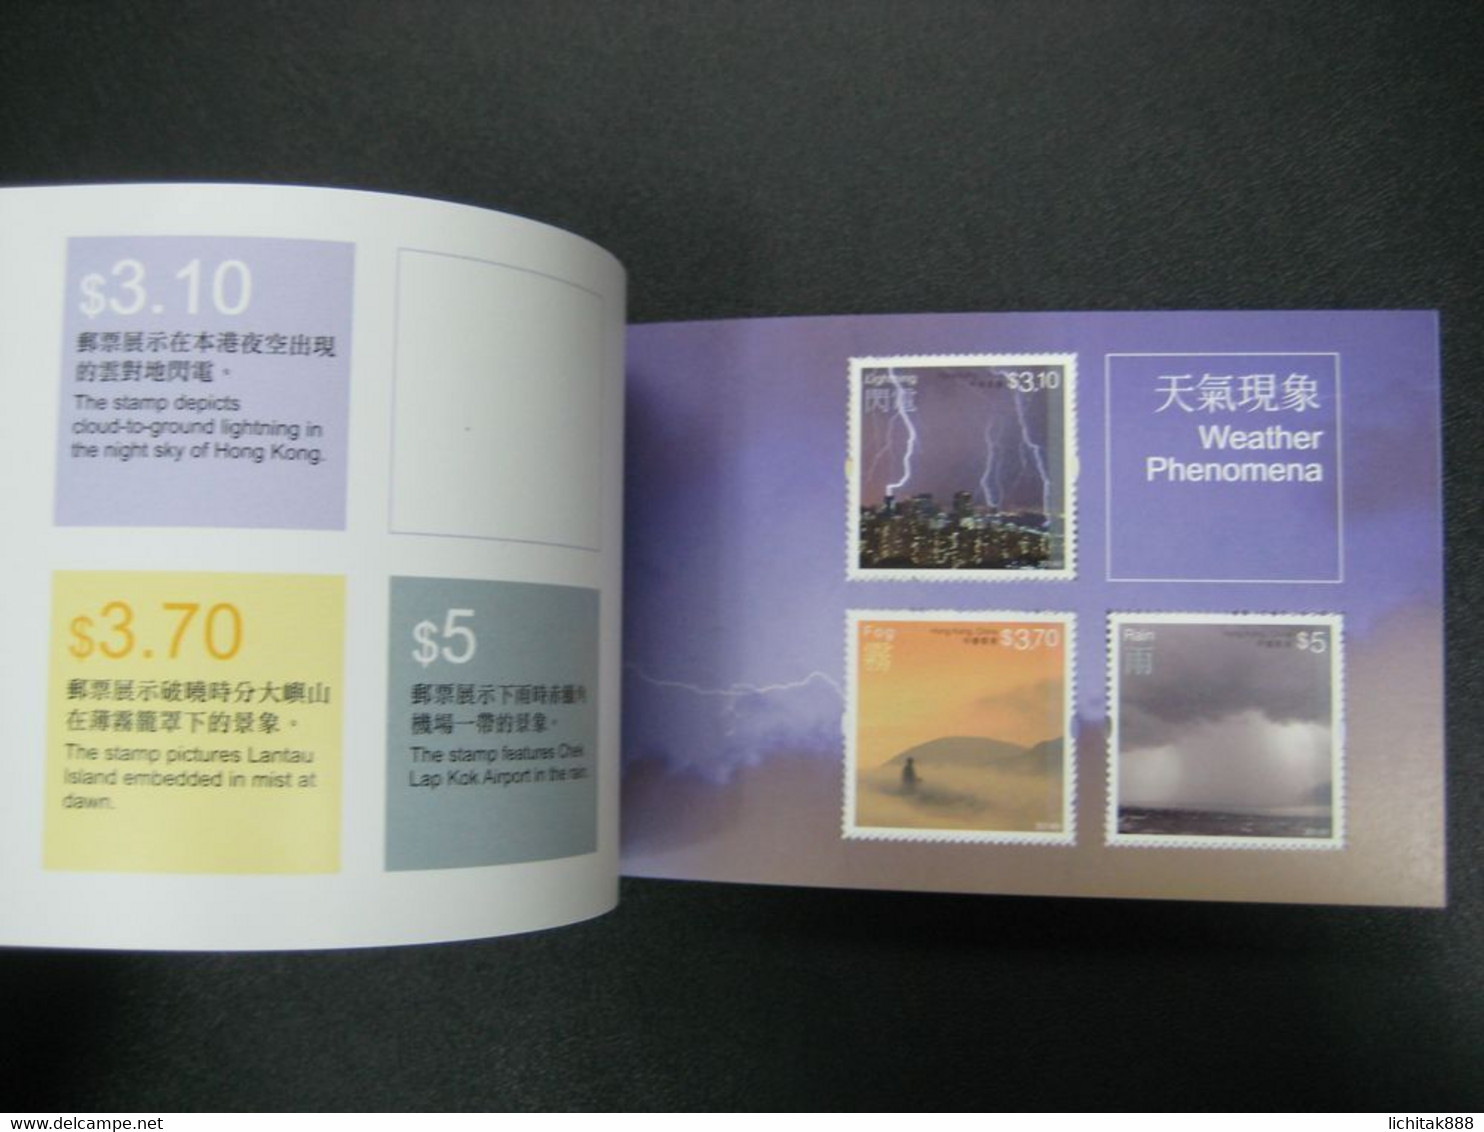 China Hong Kong 2014 Booklet Weather Phenomena Storm stamps - Booklets